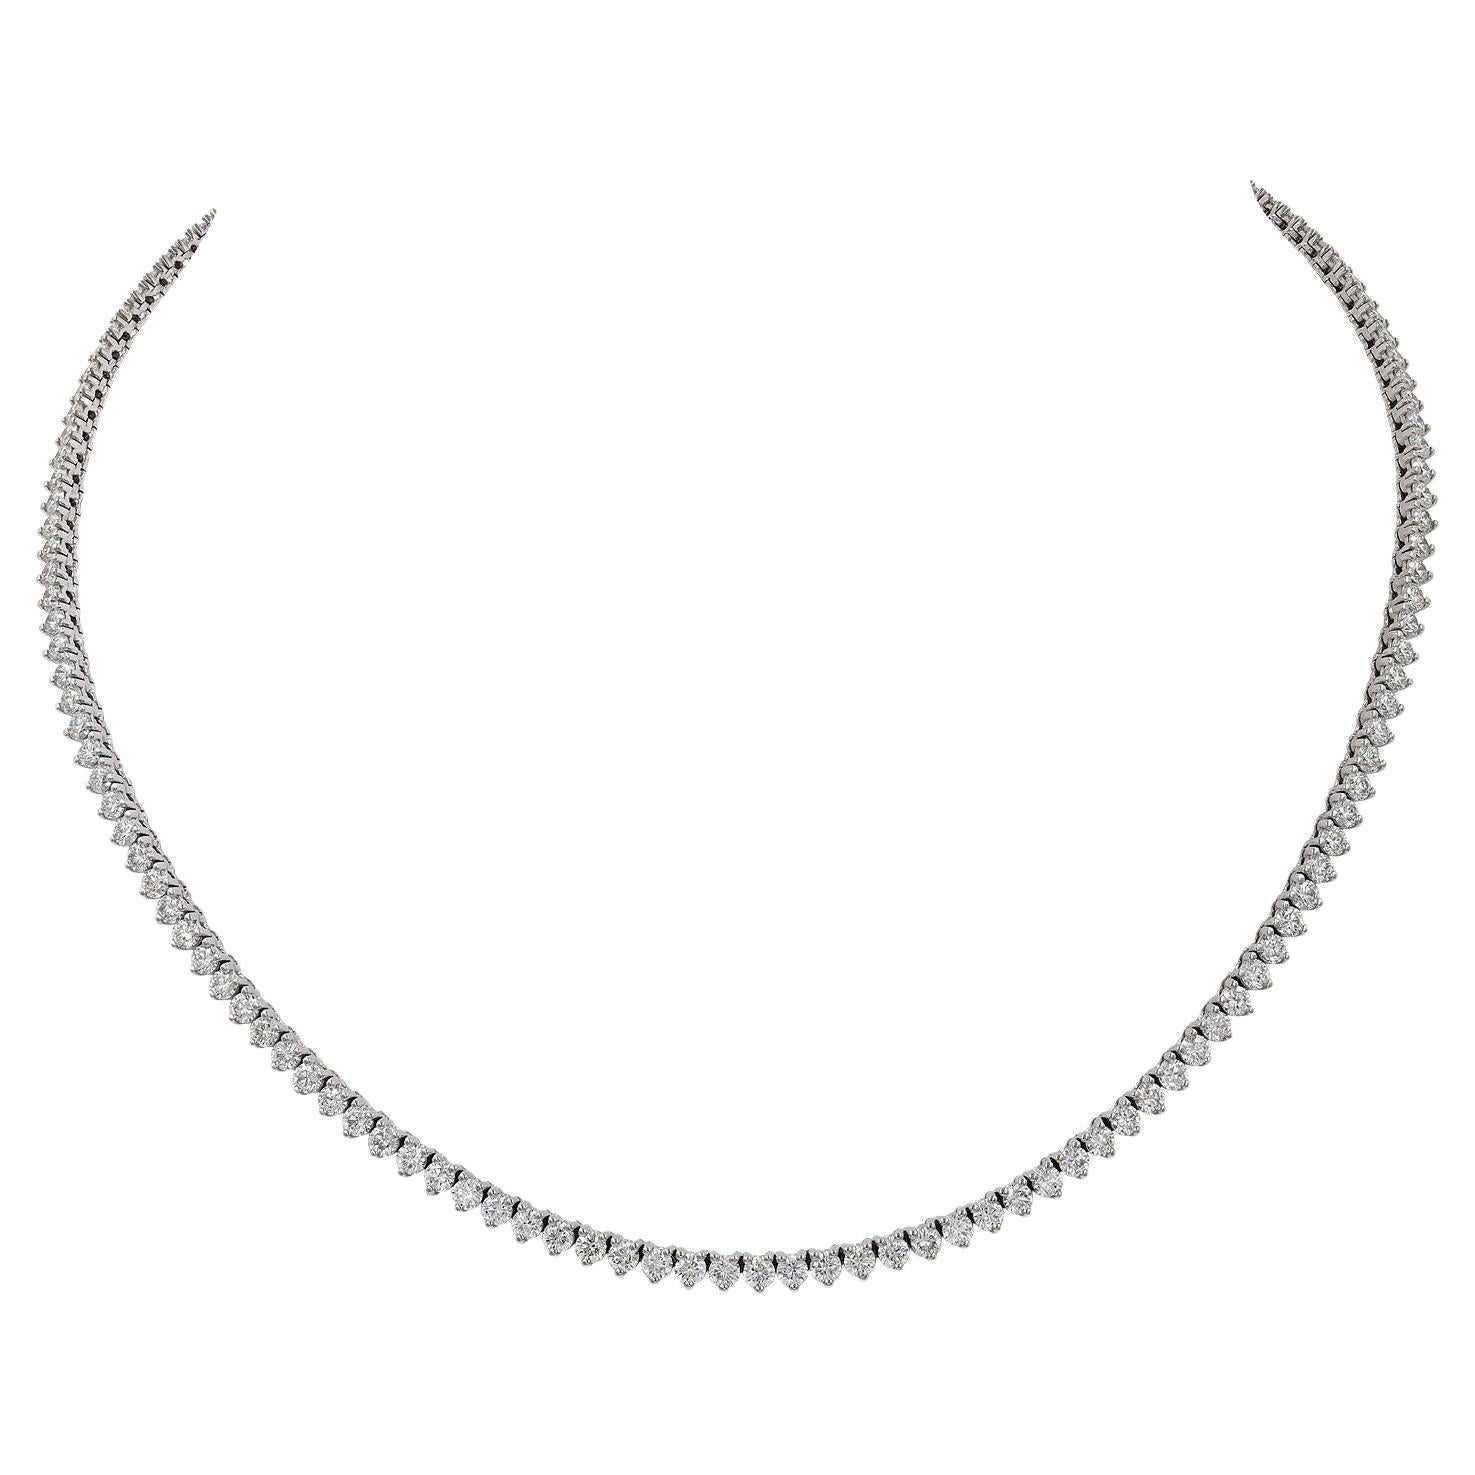 Spectra Fine Jewelry 7.89 Carat Round Diamond Tennis Necklace in 18k Gold For Sale